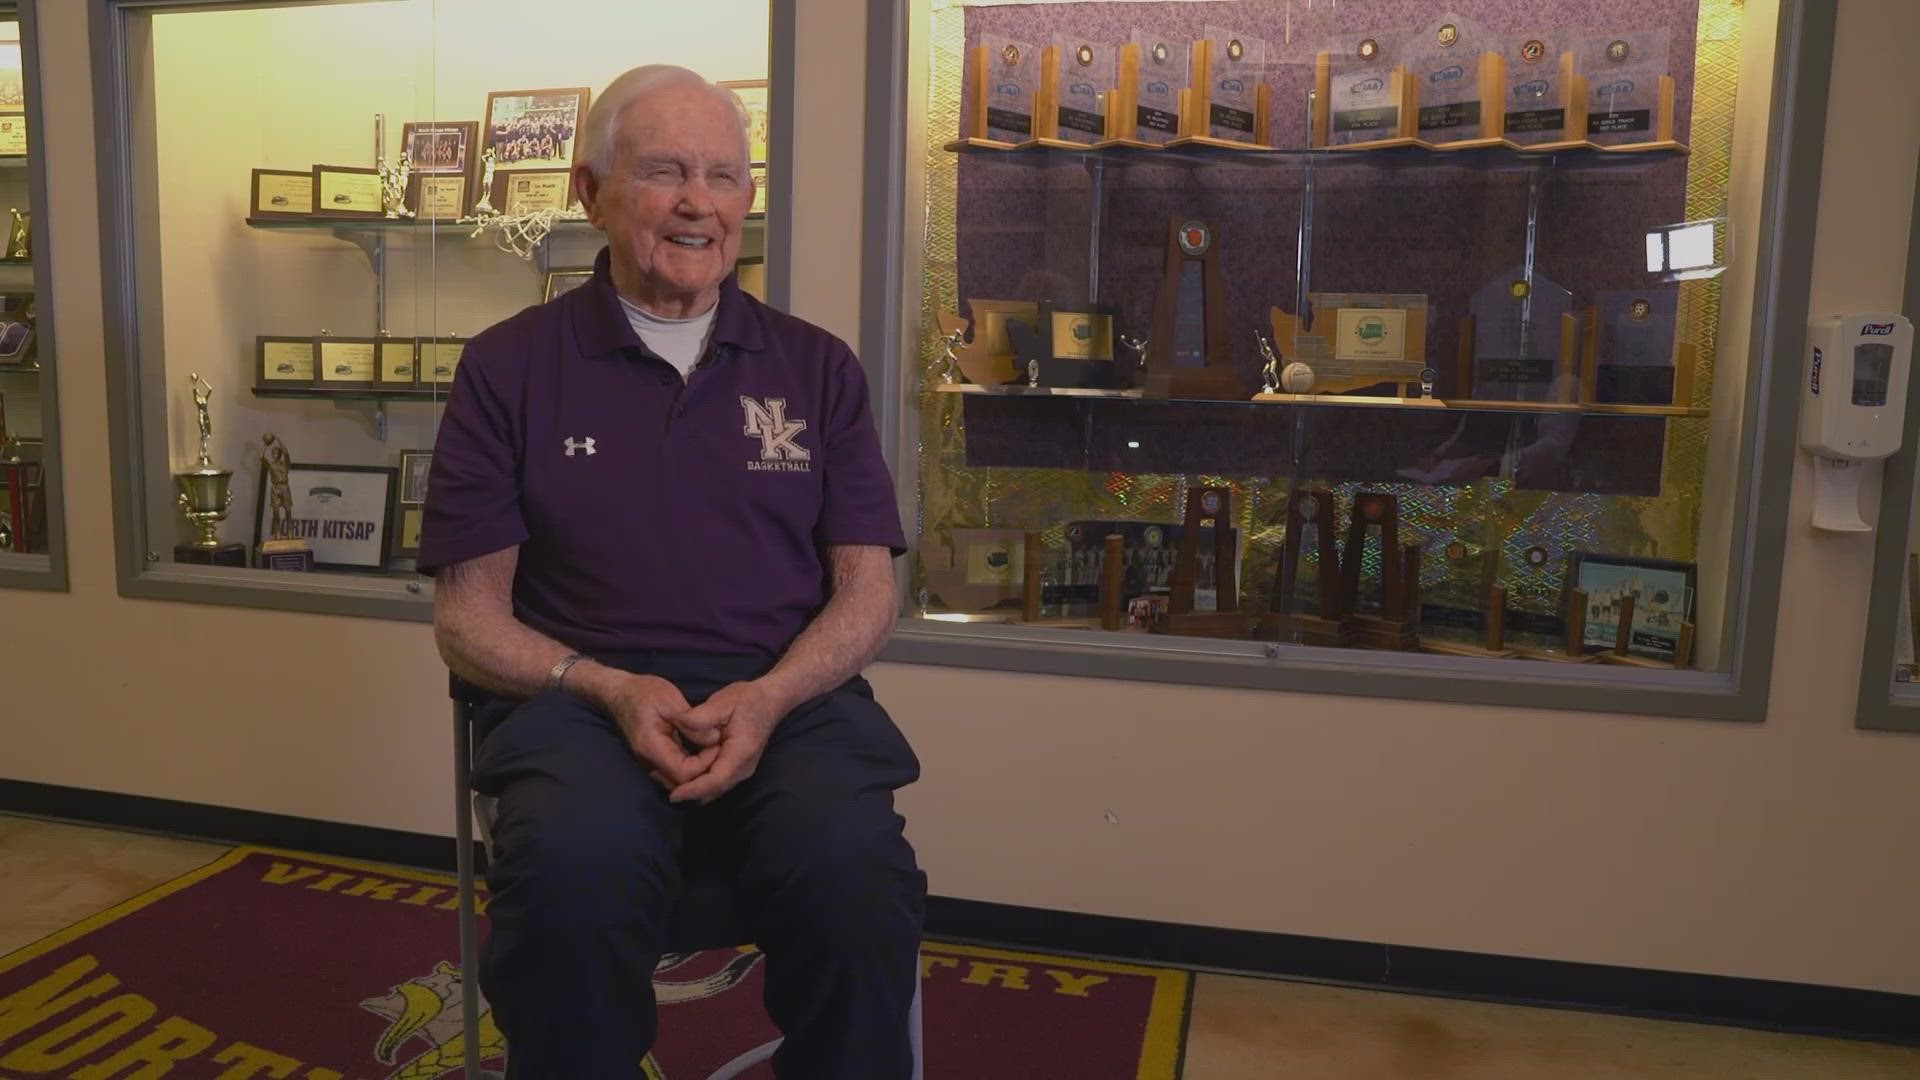 Jim Harney's athletic journey began at Seattle Prep, where he was a stand-out basketball and baseball player in the 50's.